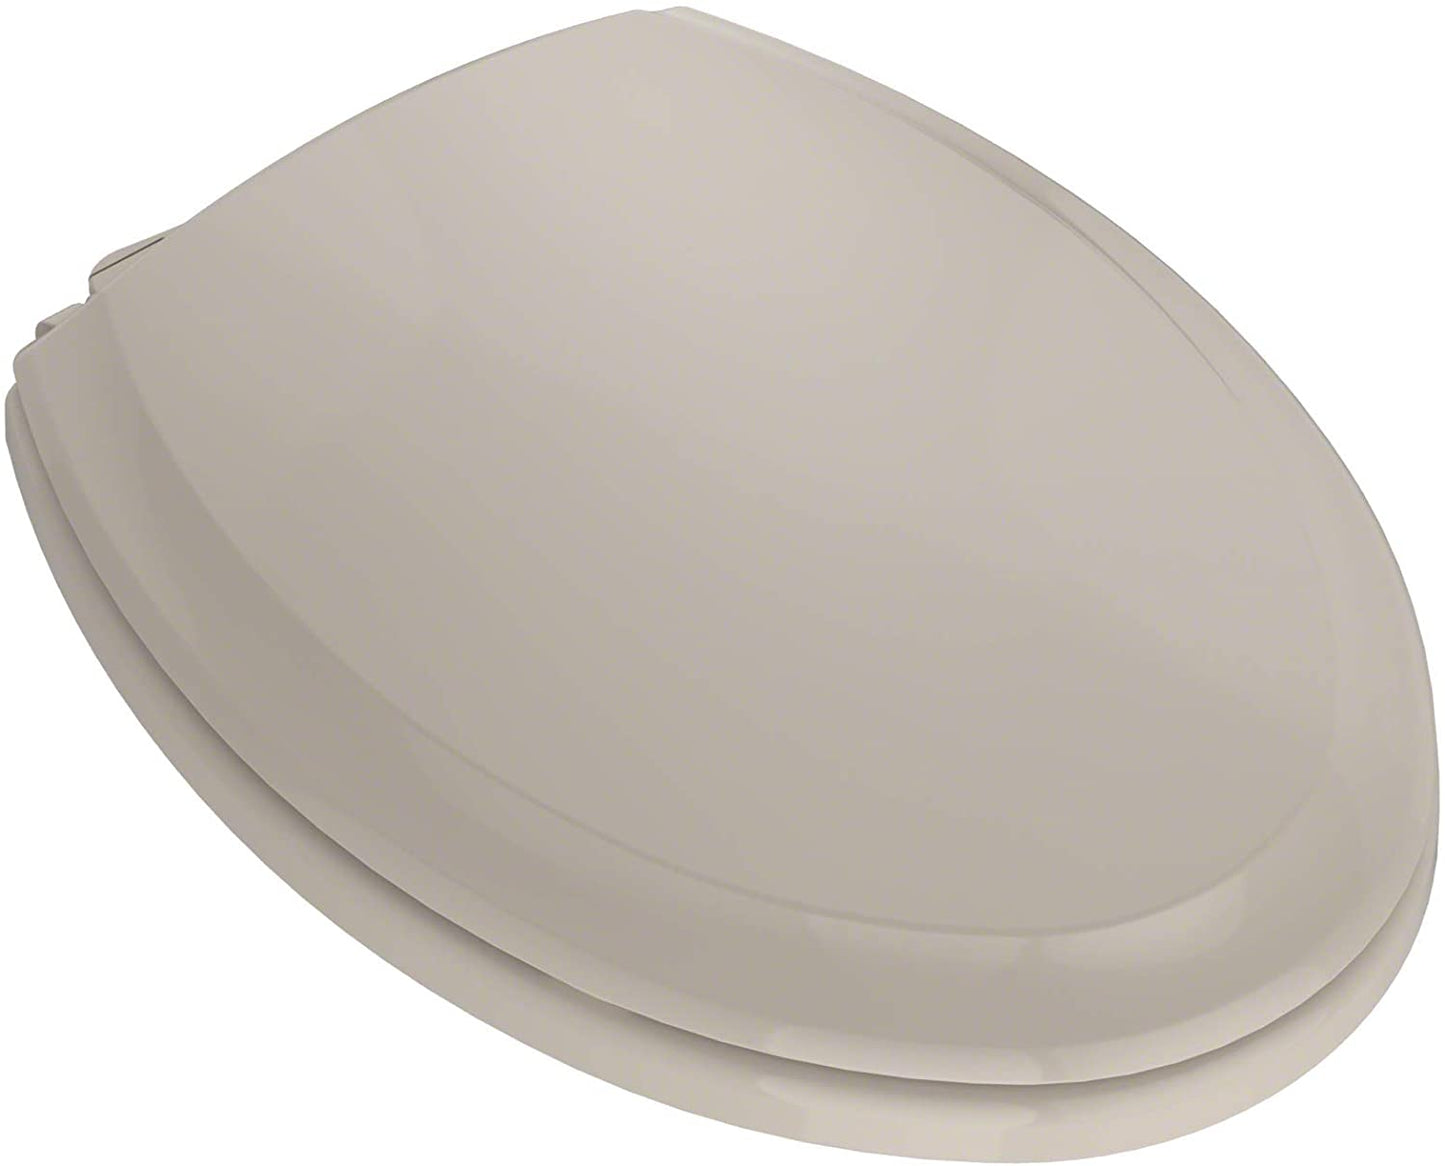 SS224#03 - Guinevere SoftClose Elongated Toilet Seat- Bone